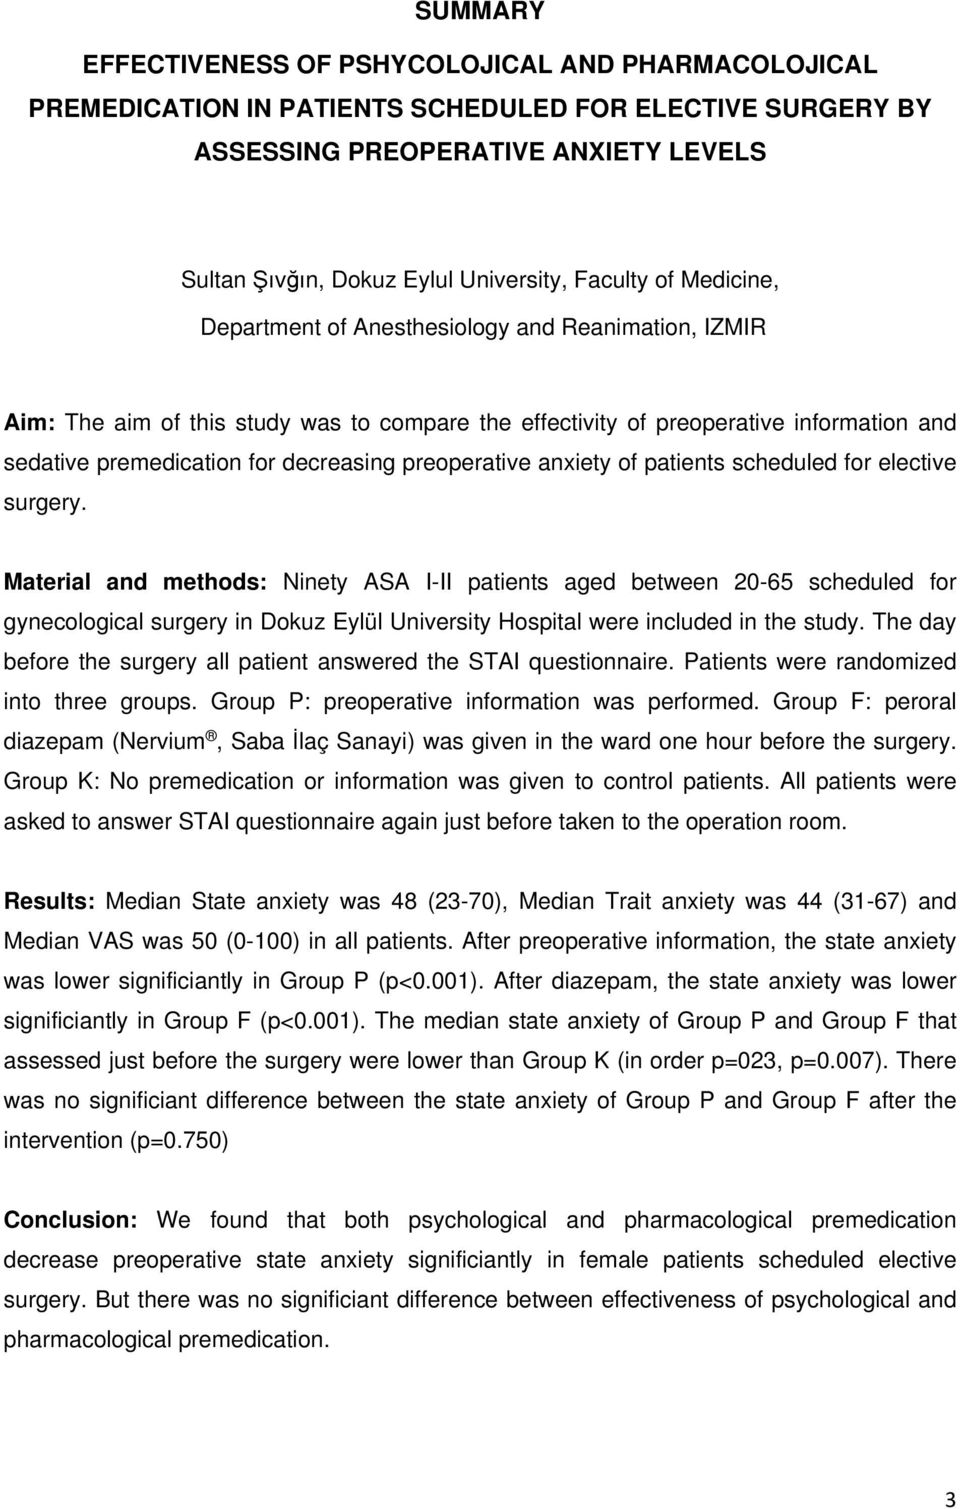 decreasing preoperative anxiety of patients scheduled for elective surgery.